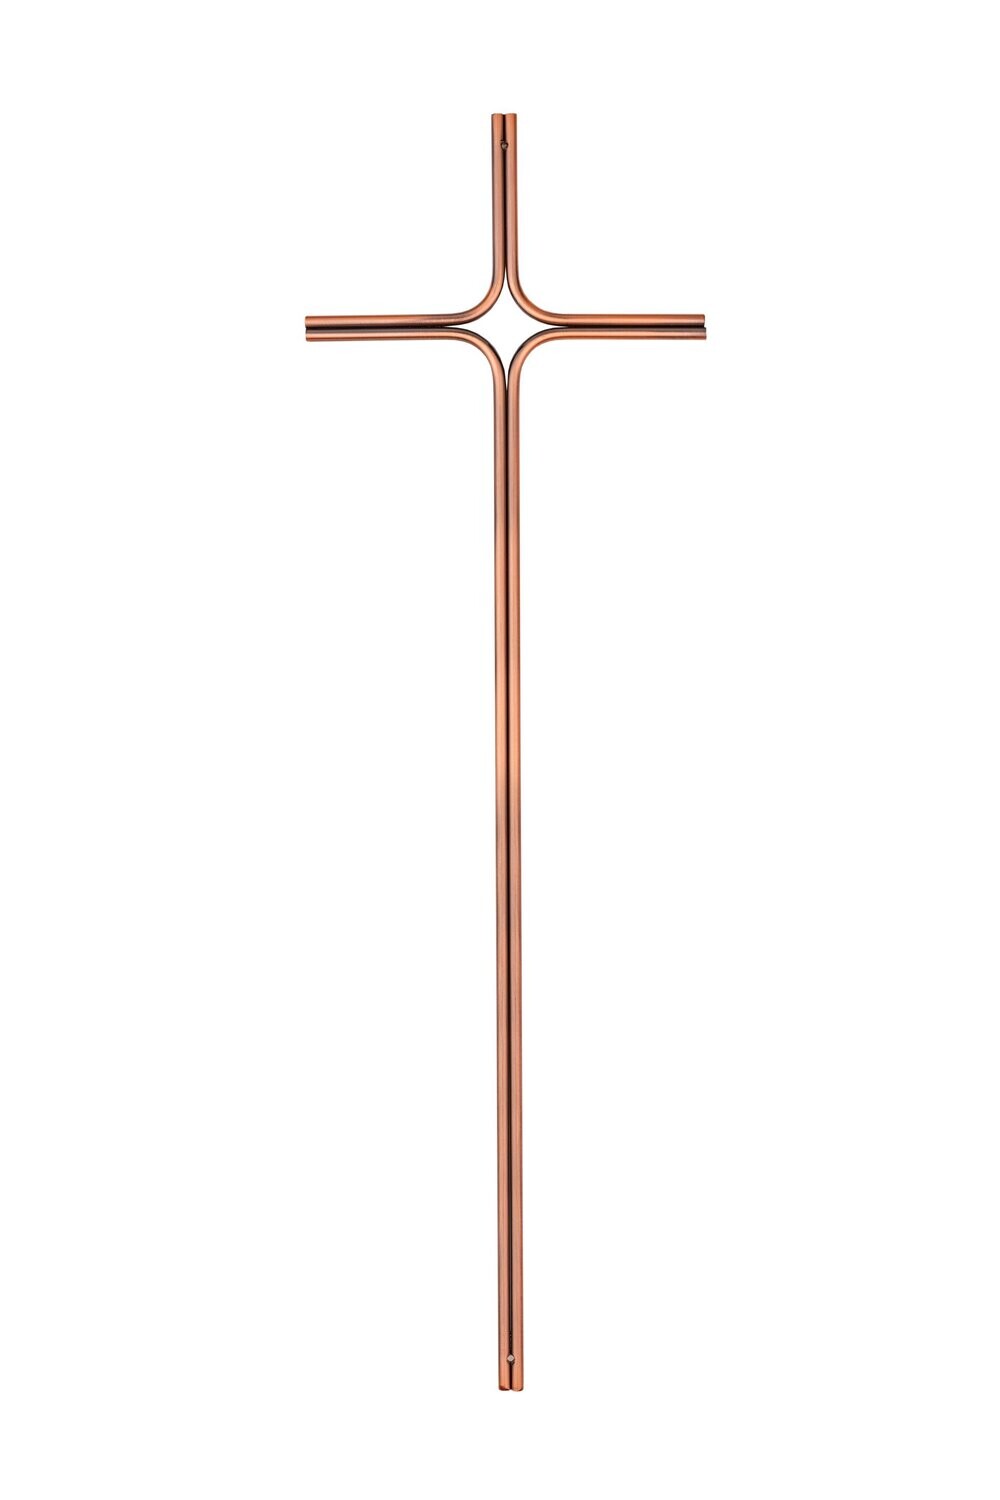 Cross for coffin in steel series 558 vintage copper finishing